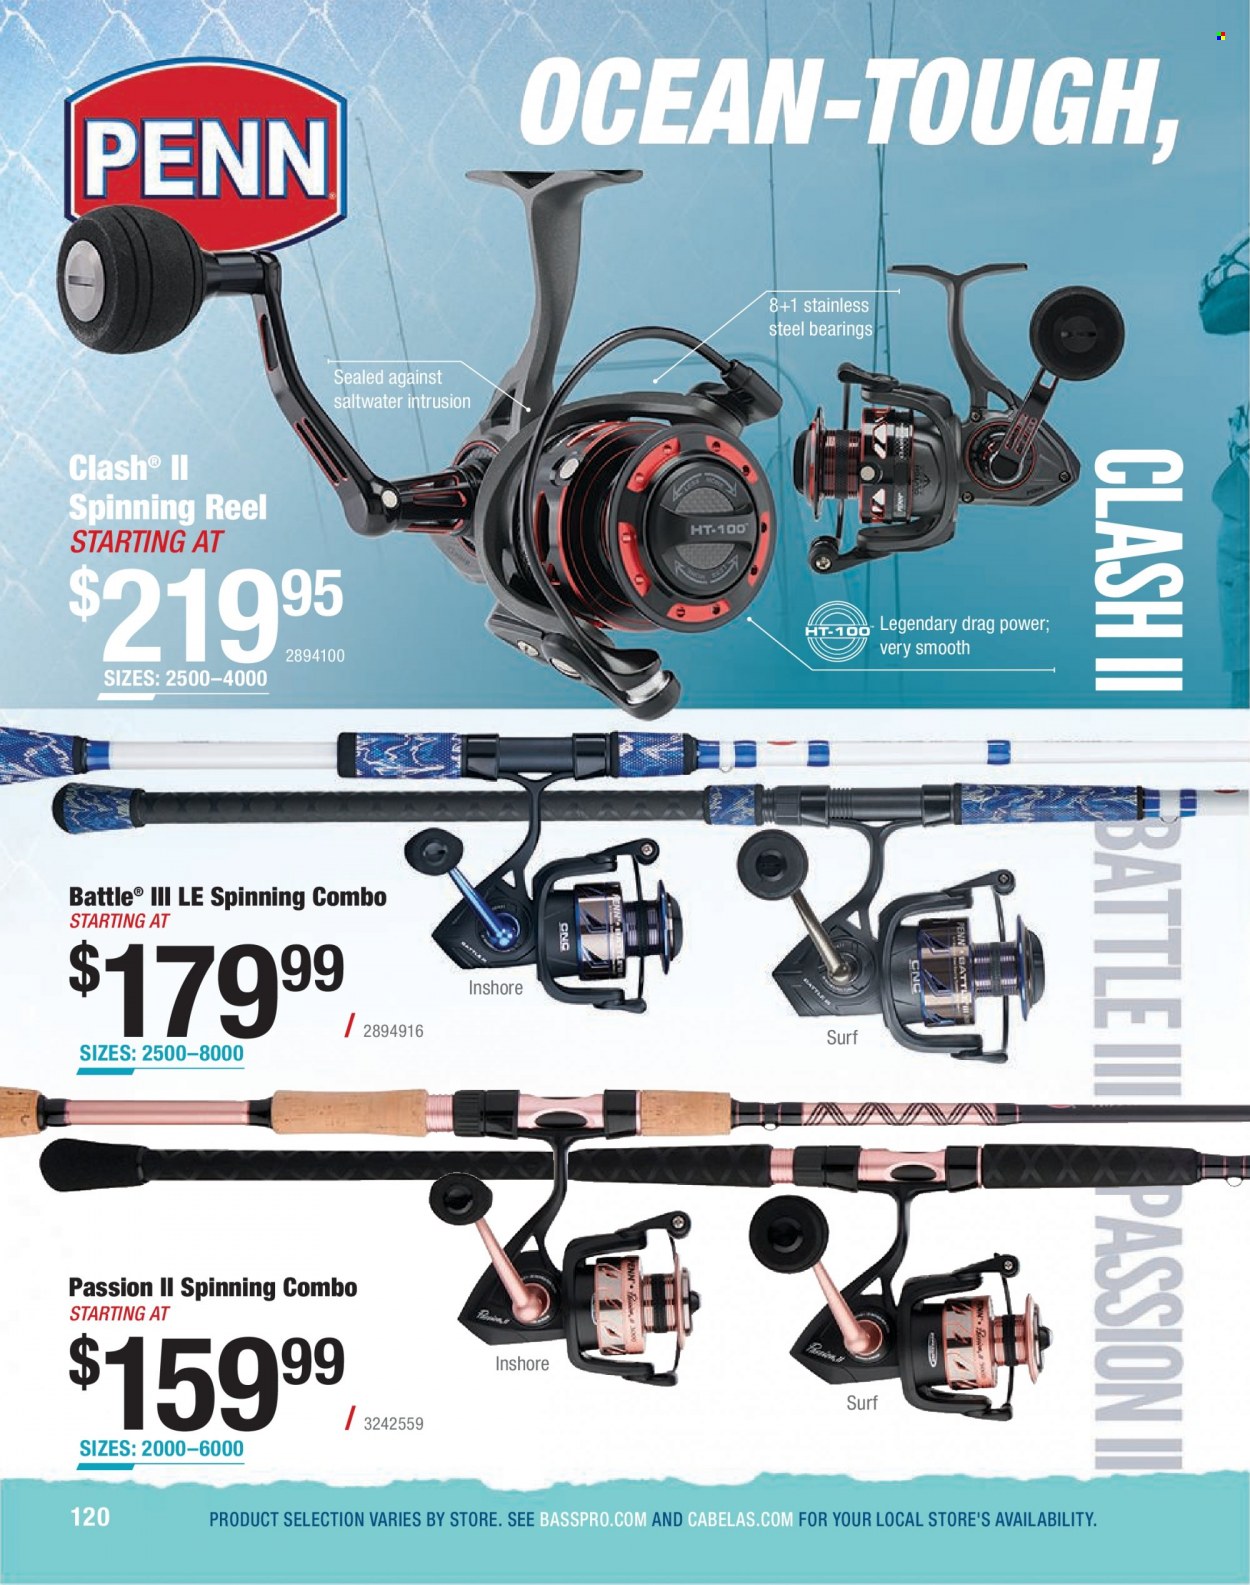 Bass Pro Shops Flyer - Sales products - reel, spinning reel, fishing rod, Penn. Page 120.